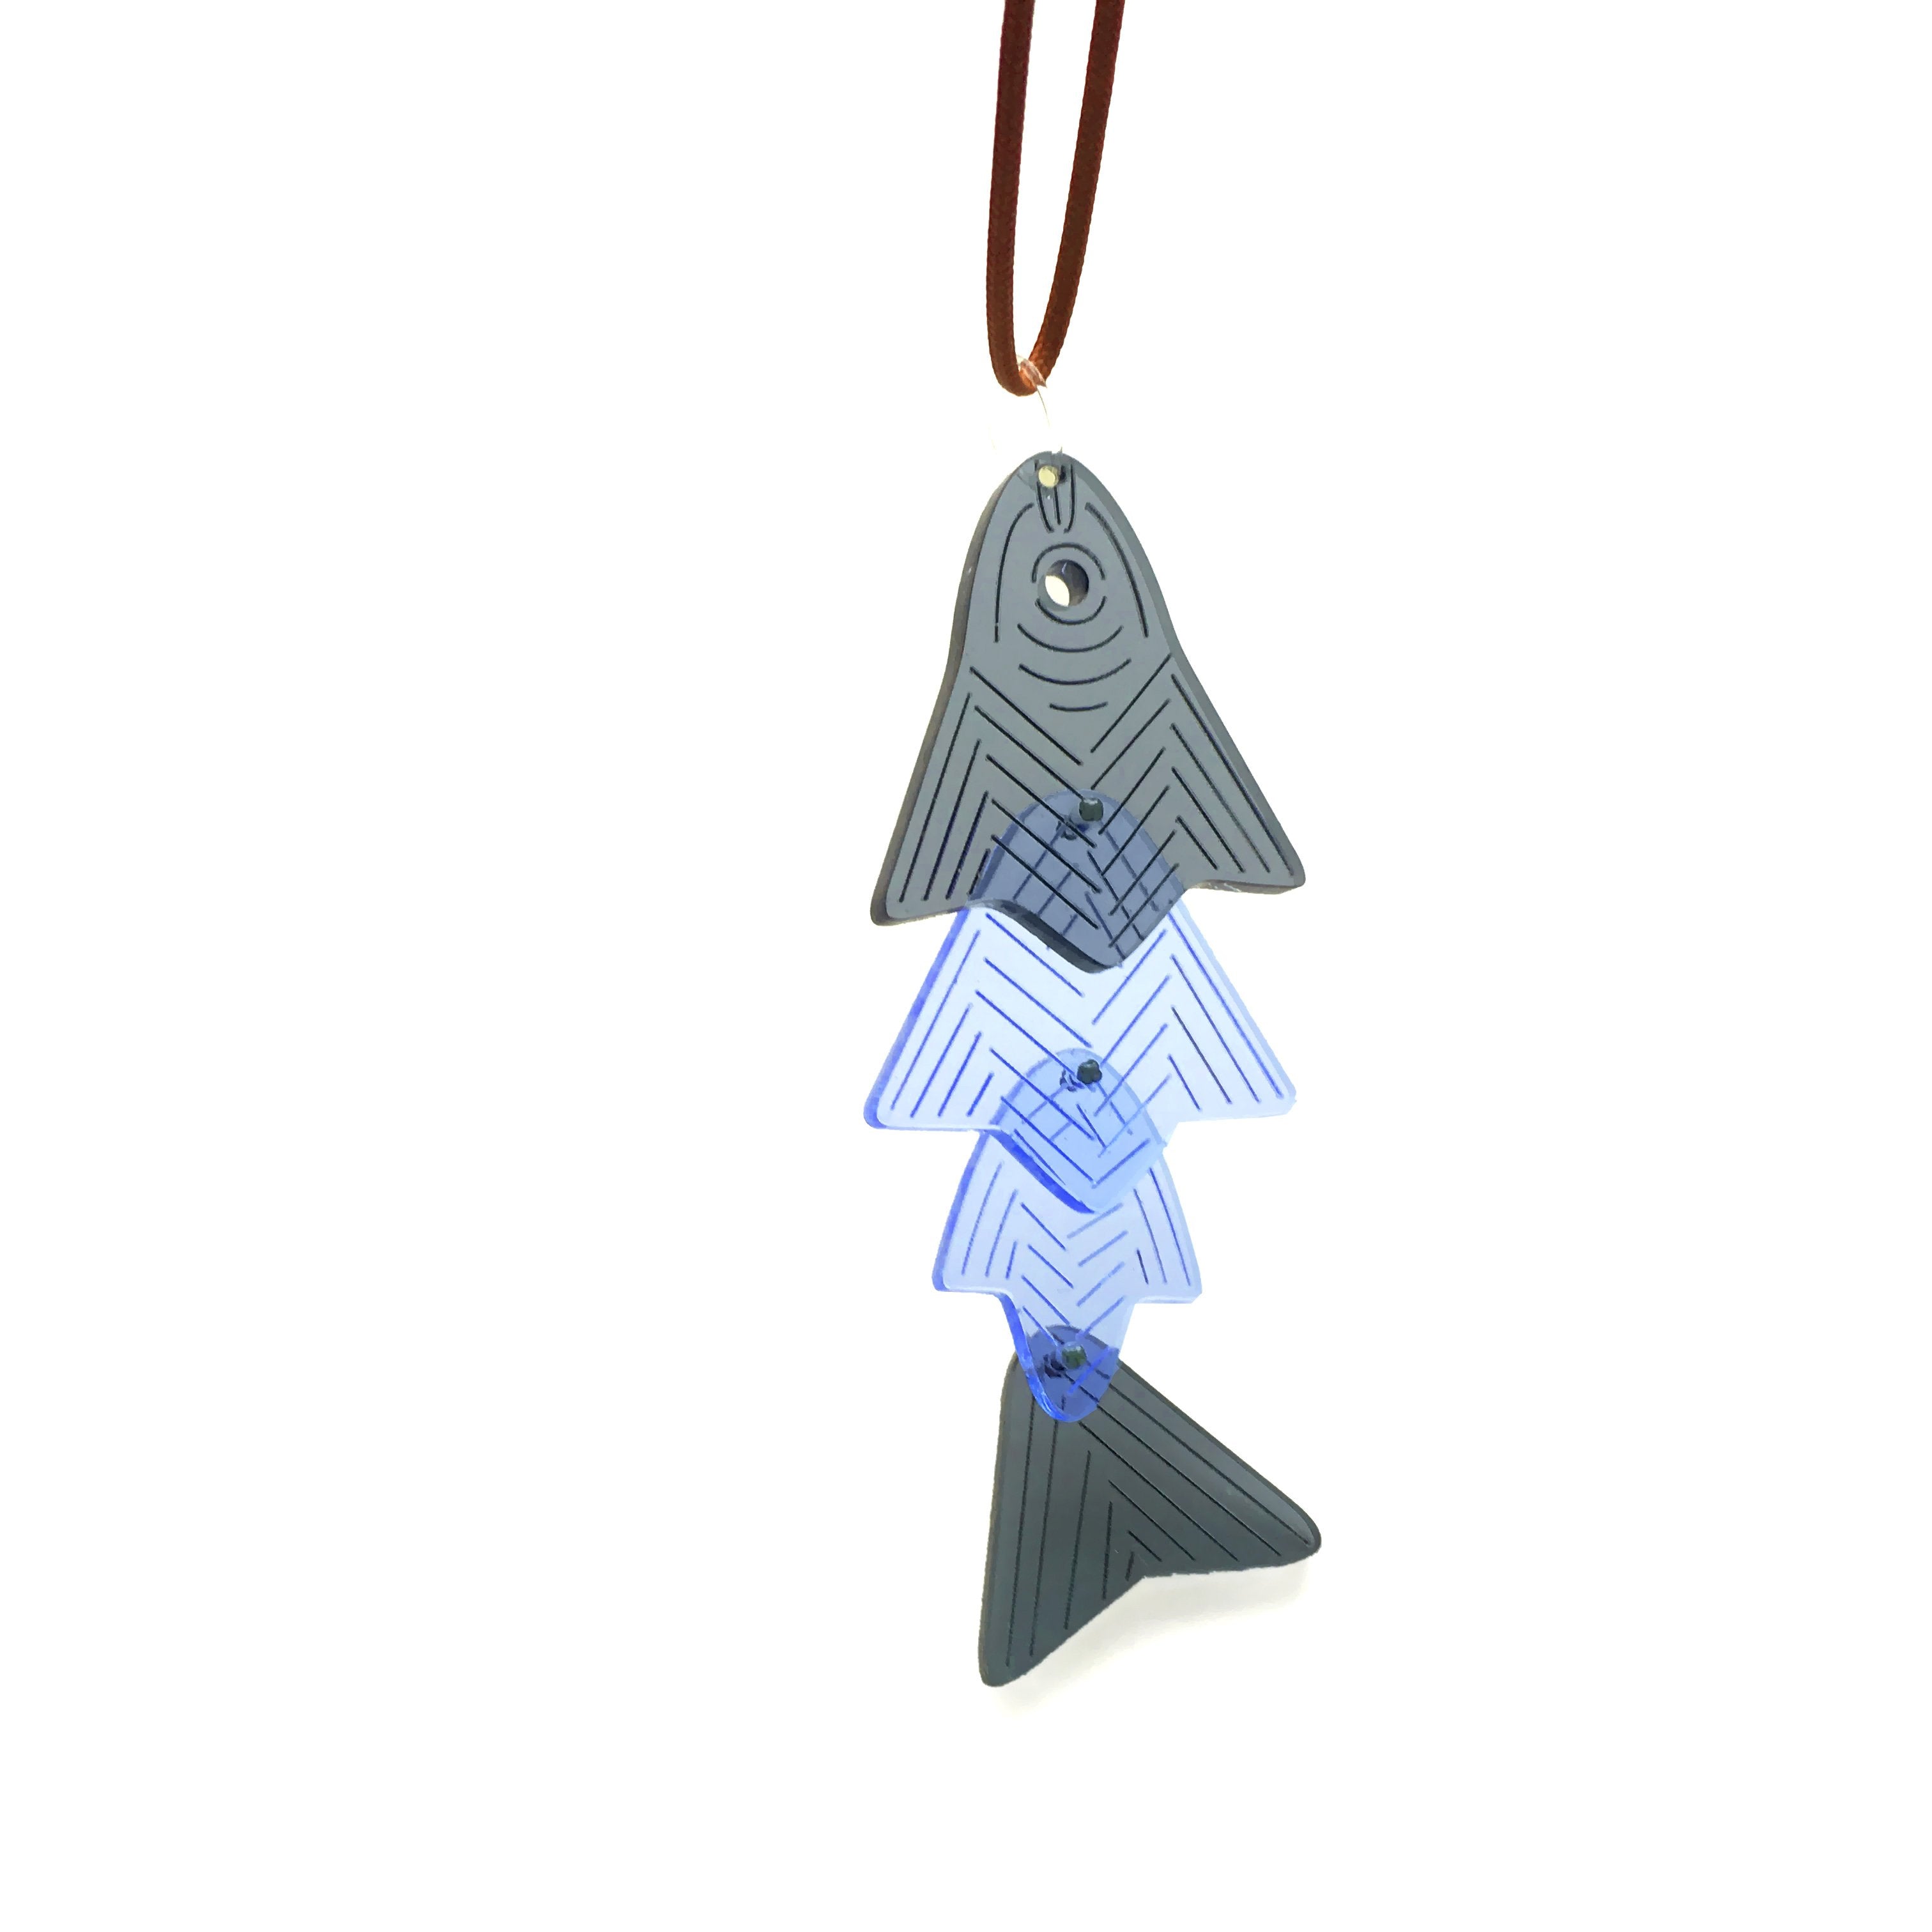 Fish necklace